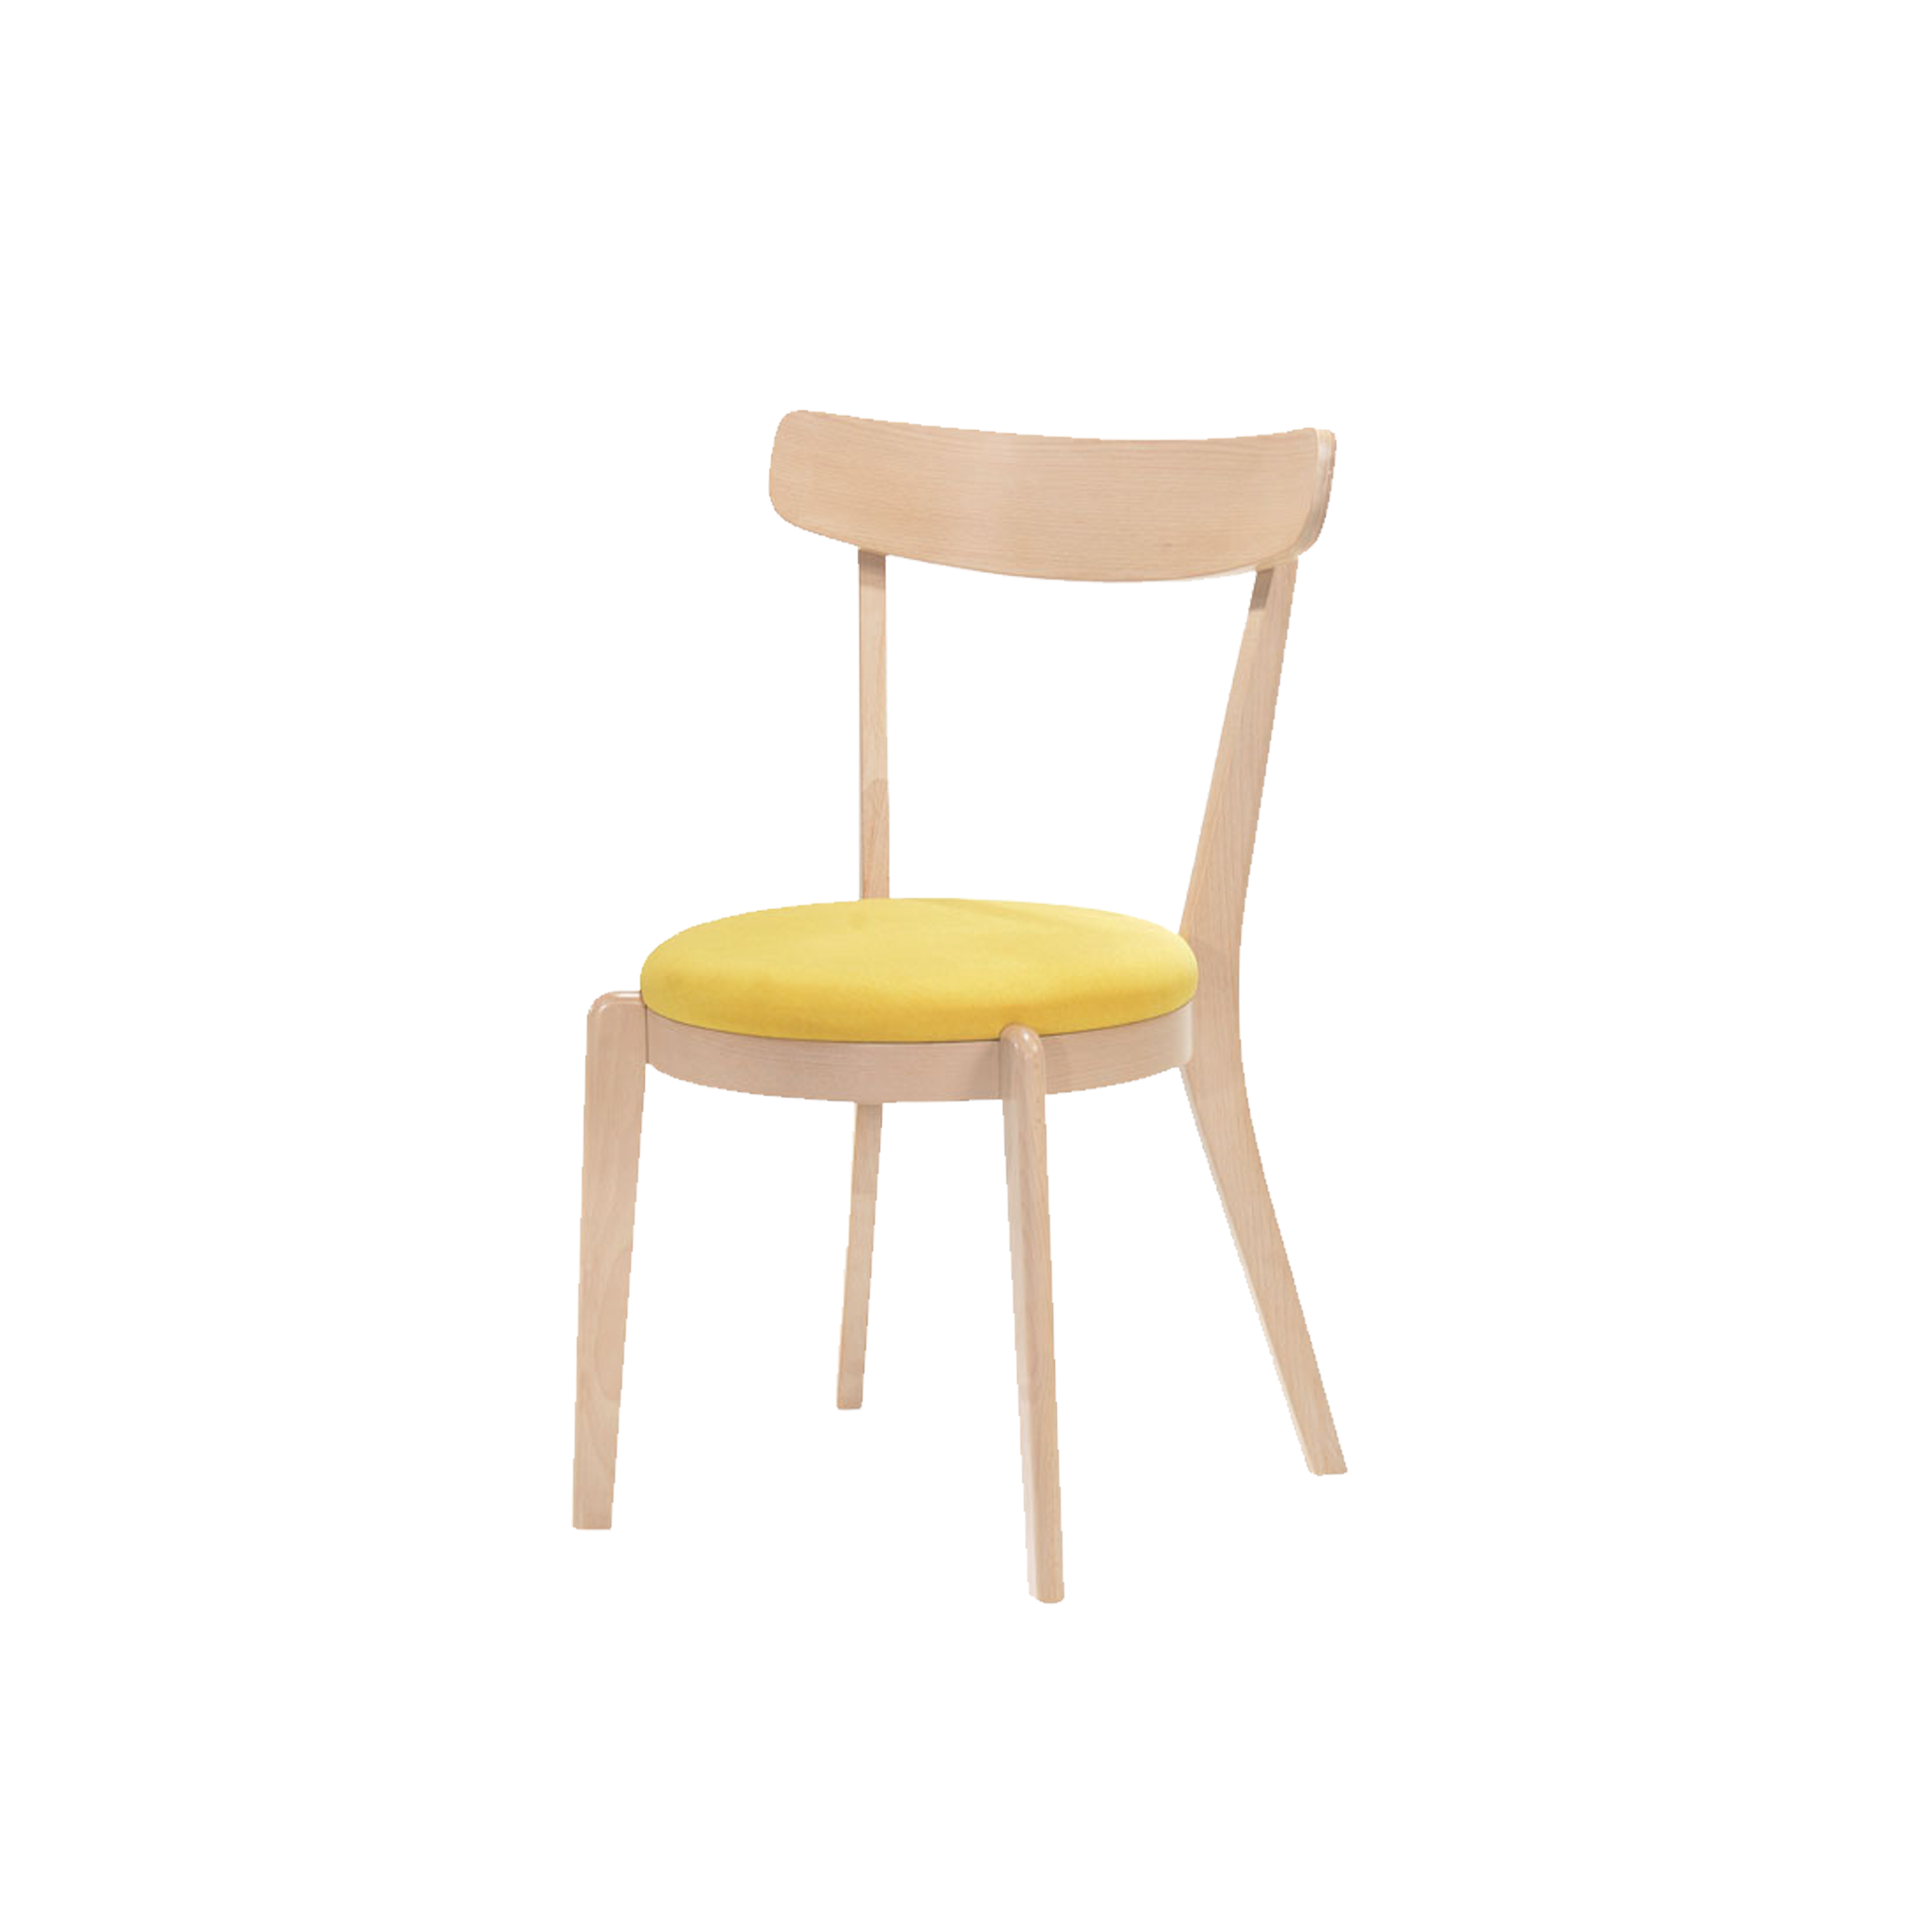 Oki Wooden Dining Chair with Cushion Seat